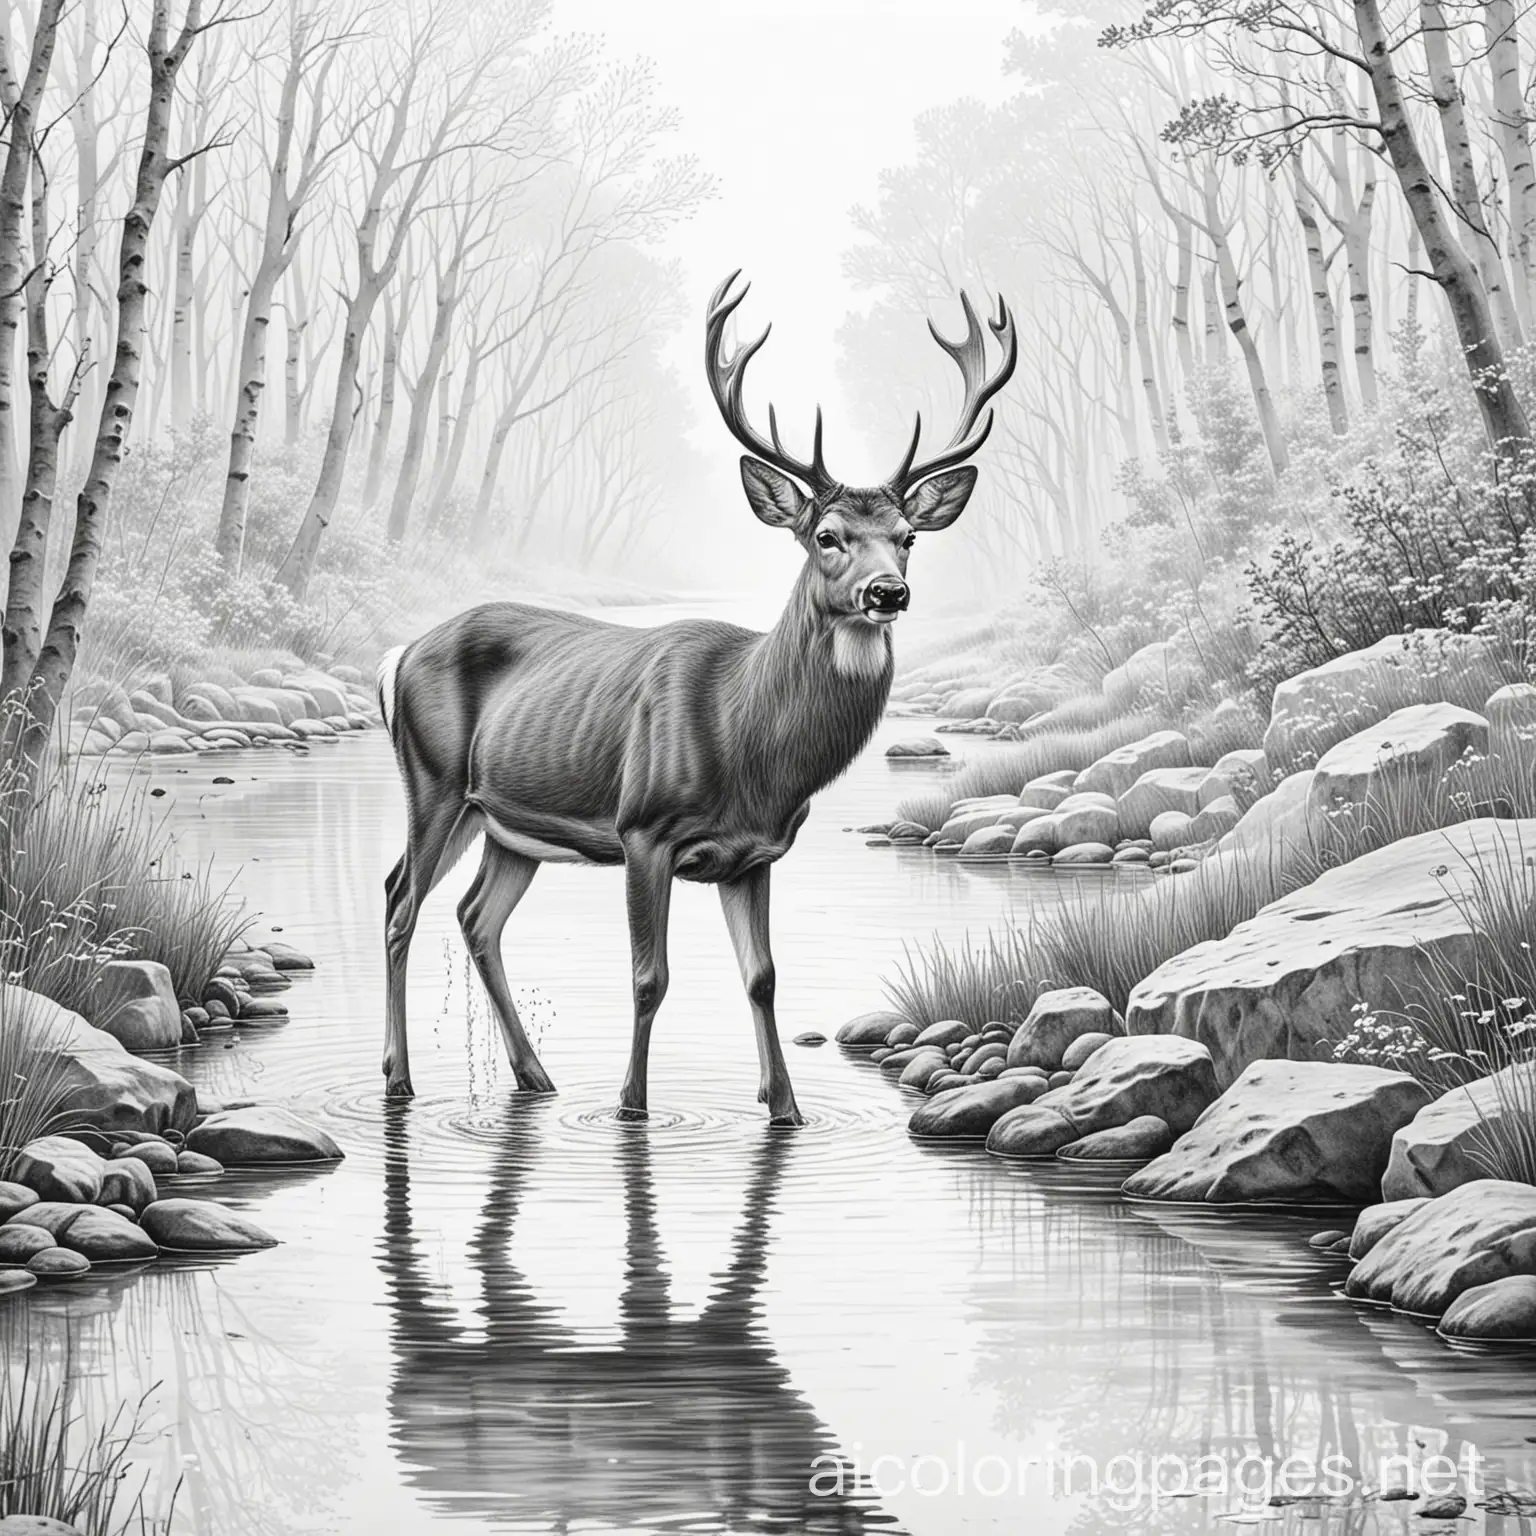 Deer-Drinking-Water-at-Brook-Coloring-Page-Tranquil-Wildlife-Scene-for-Relaxation-and-Creativity